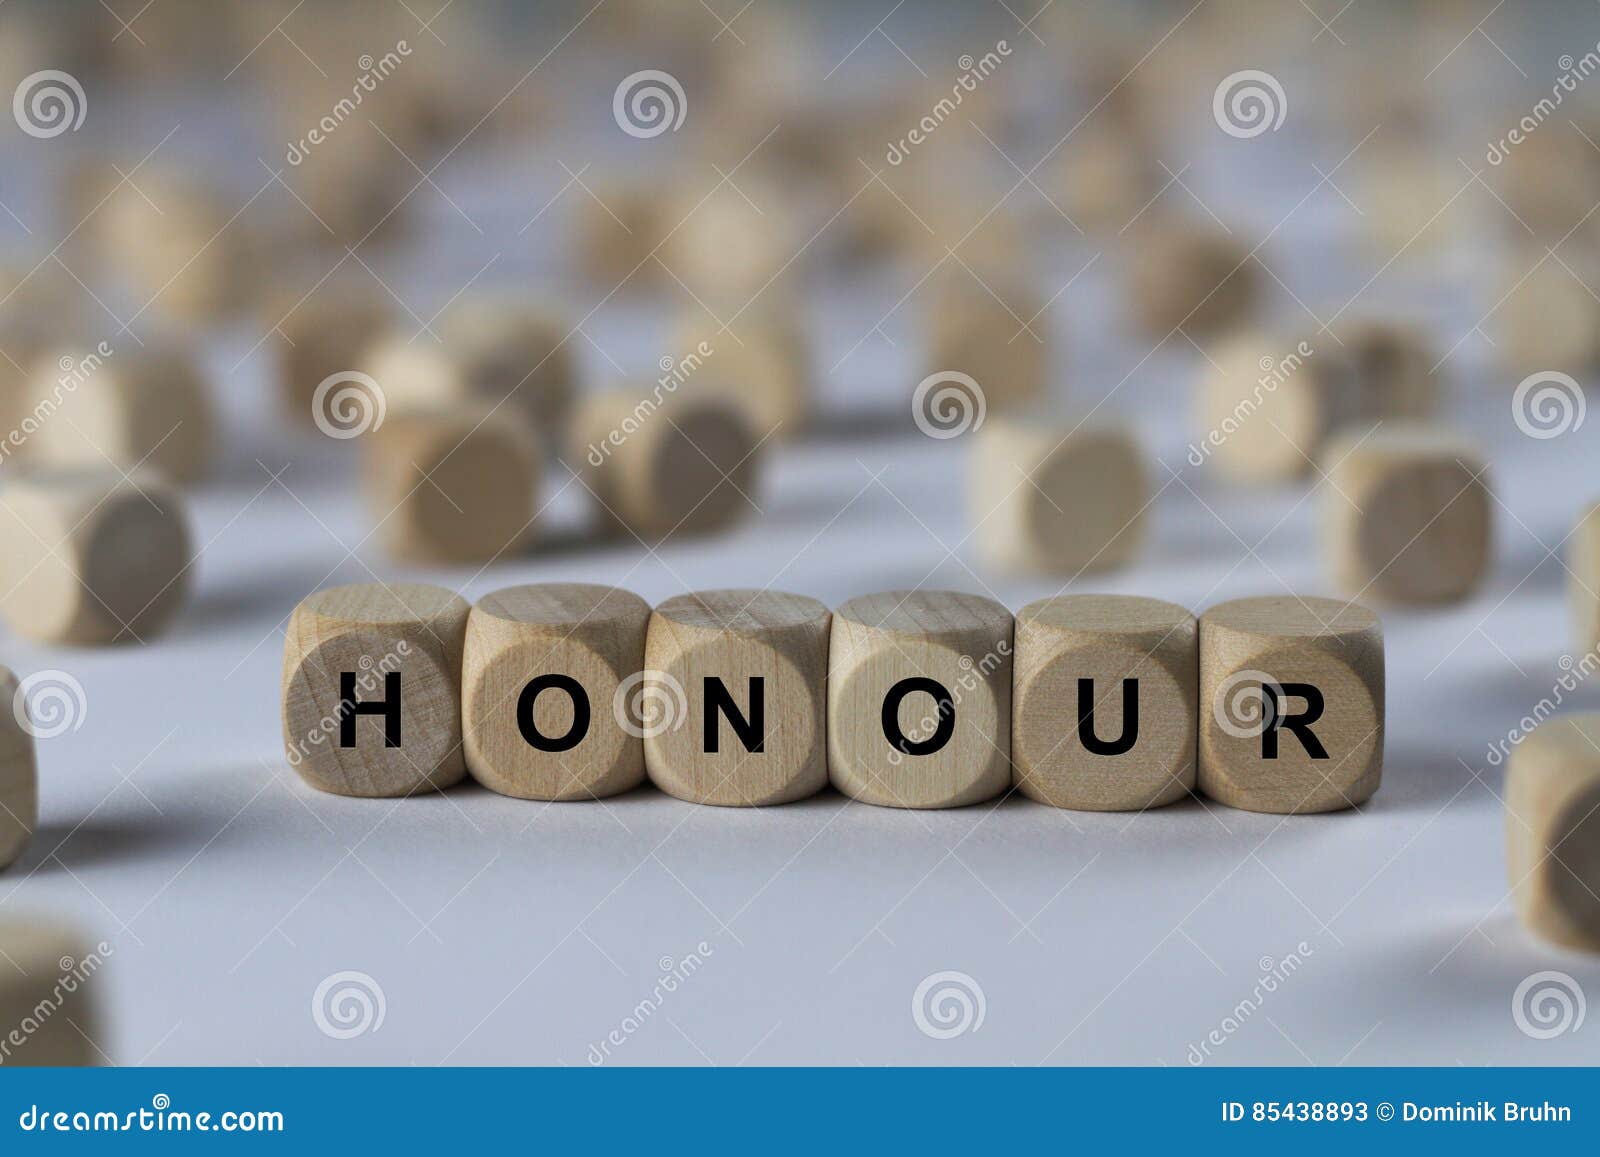 Honour - cube with letters, sign with wooden cubes. Series of images: cube with letters, sign with wooden cubes